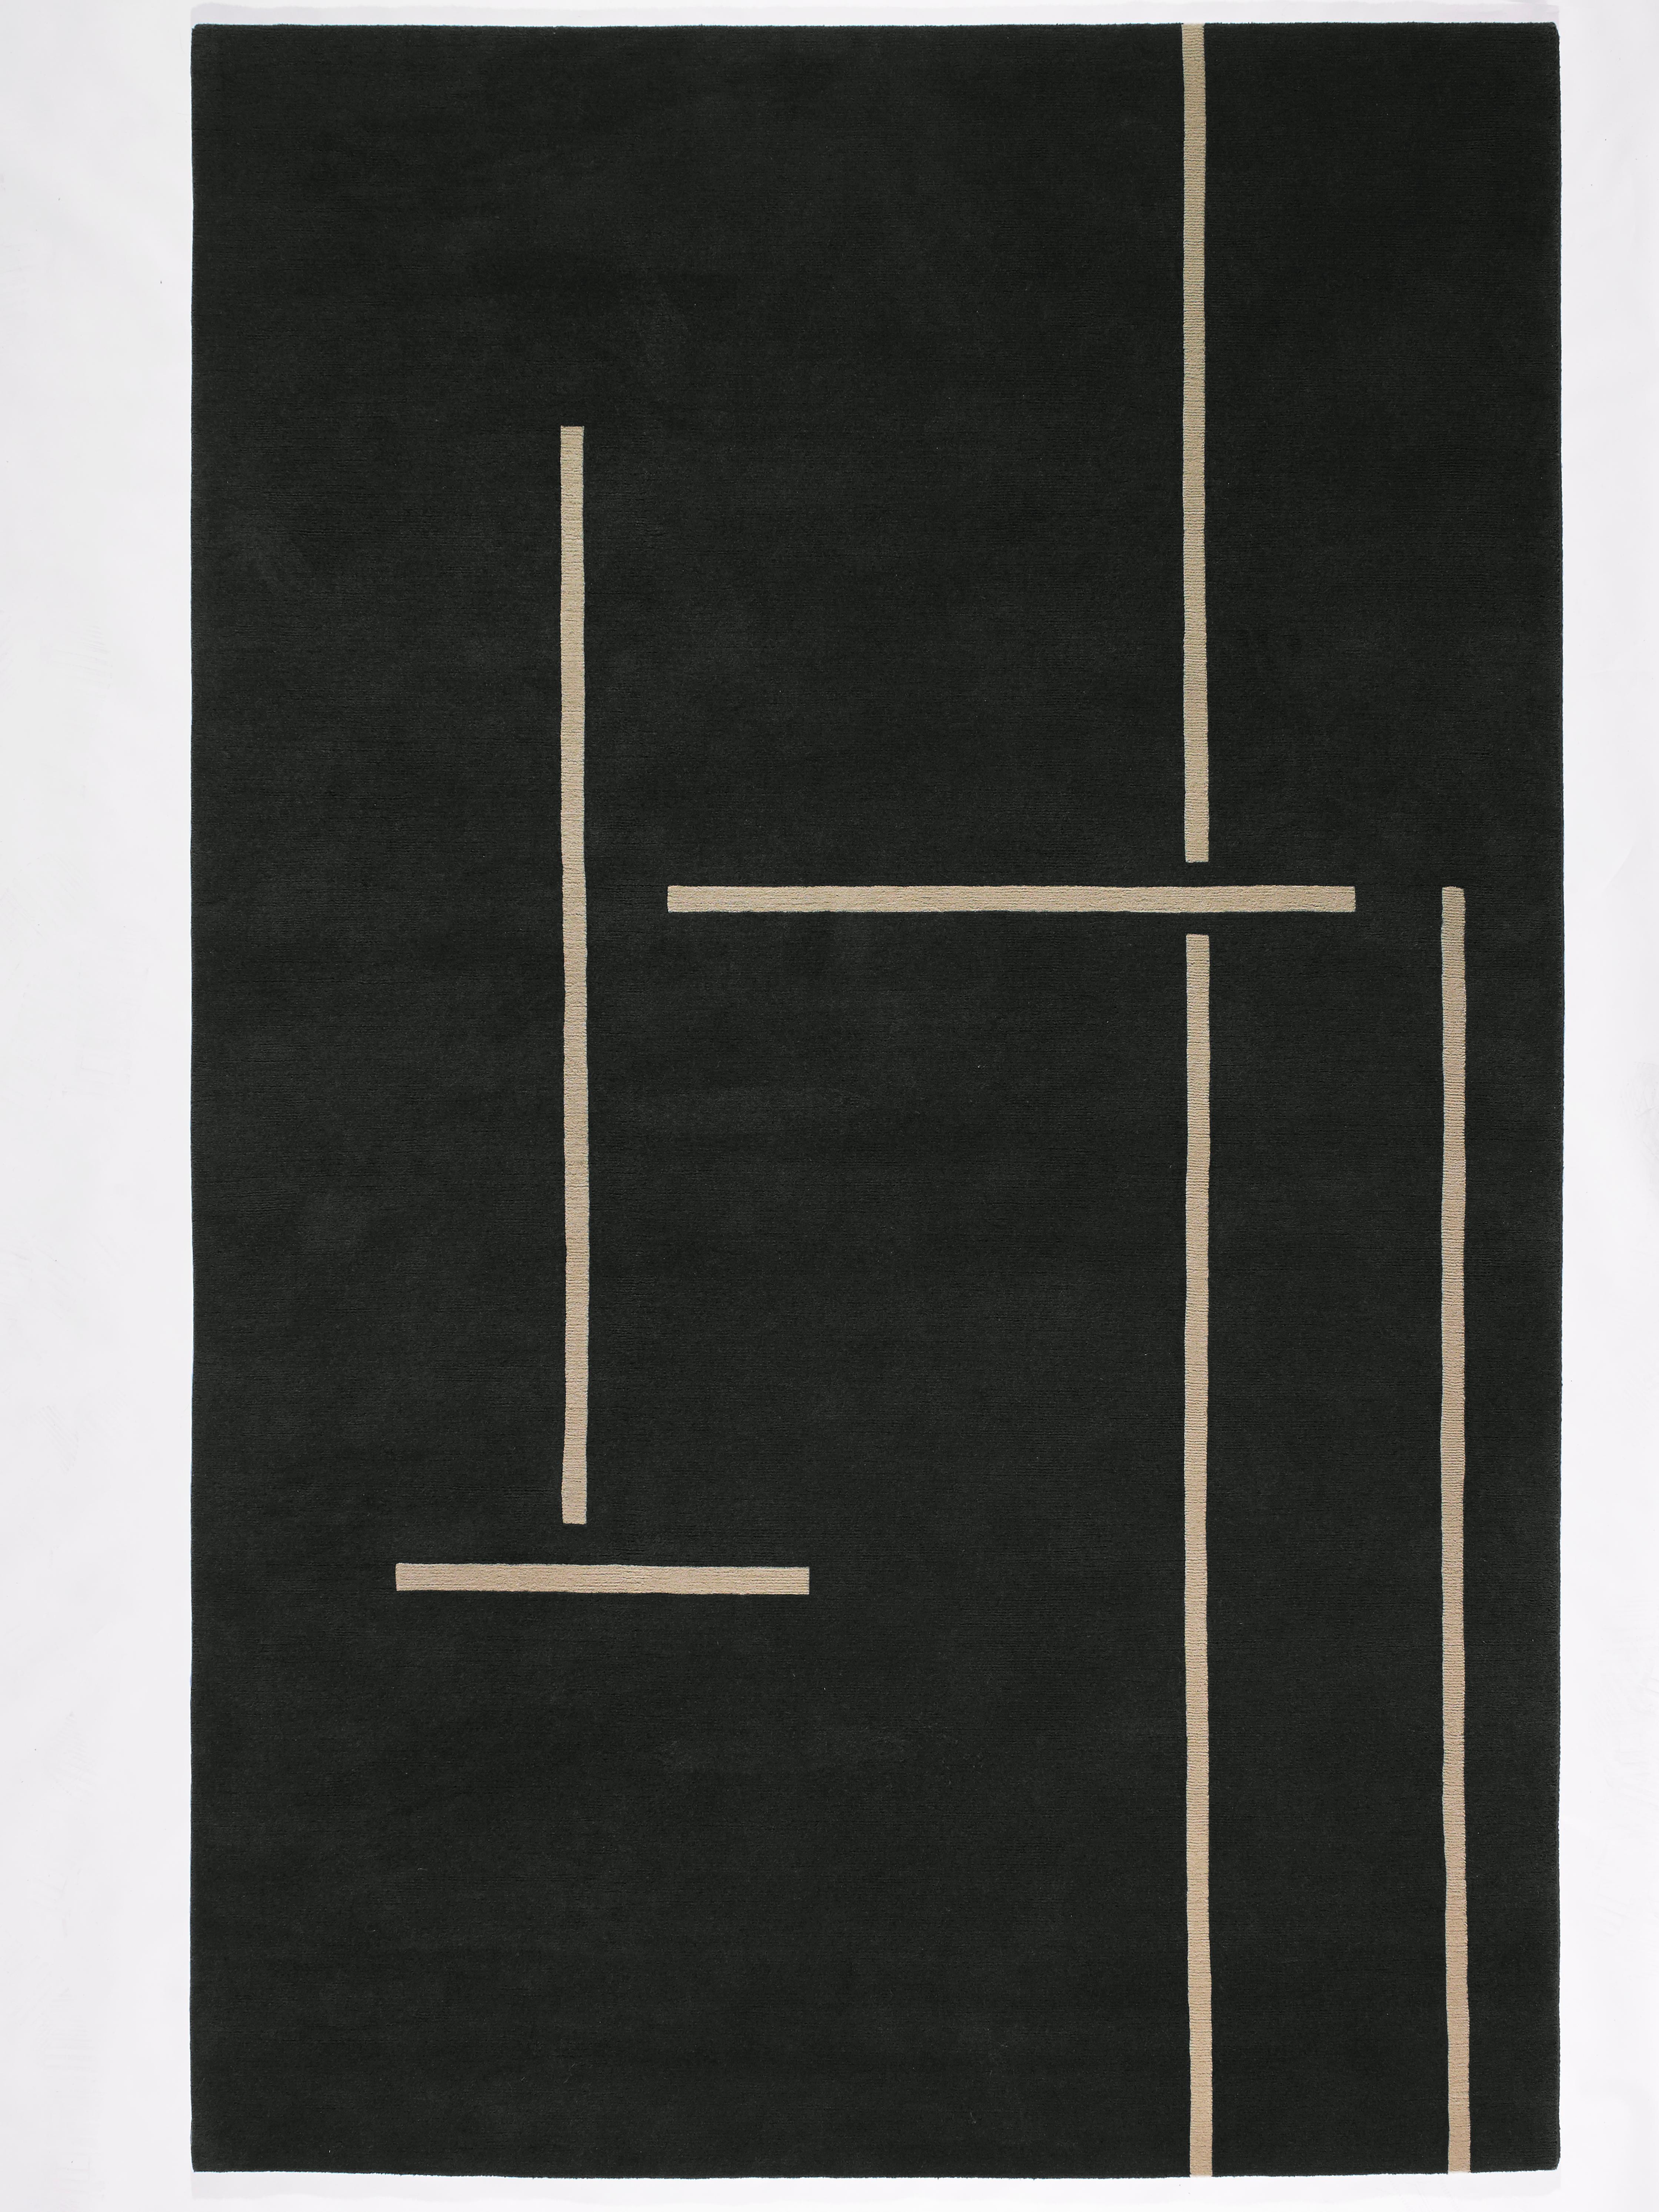 Monolith is characterised by beige horizontal and vertical lines of varying lengths that elegantly accentuate the earthy dark grey background. In places, the lines cross without touching - they suggest a structure that seems to divide the rug into